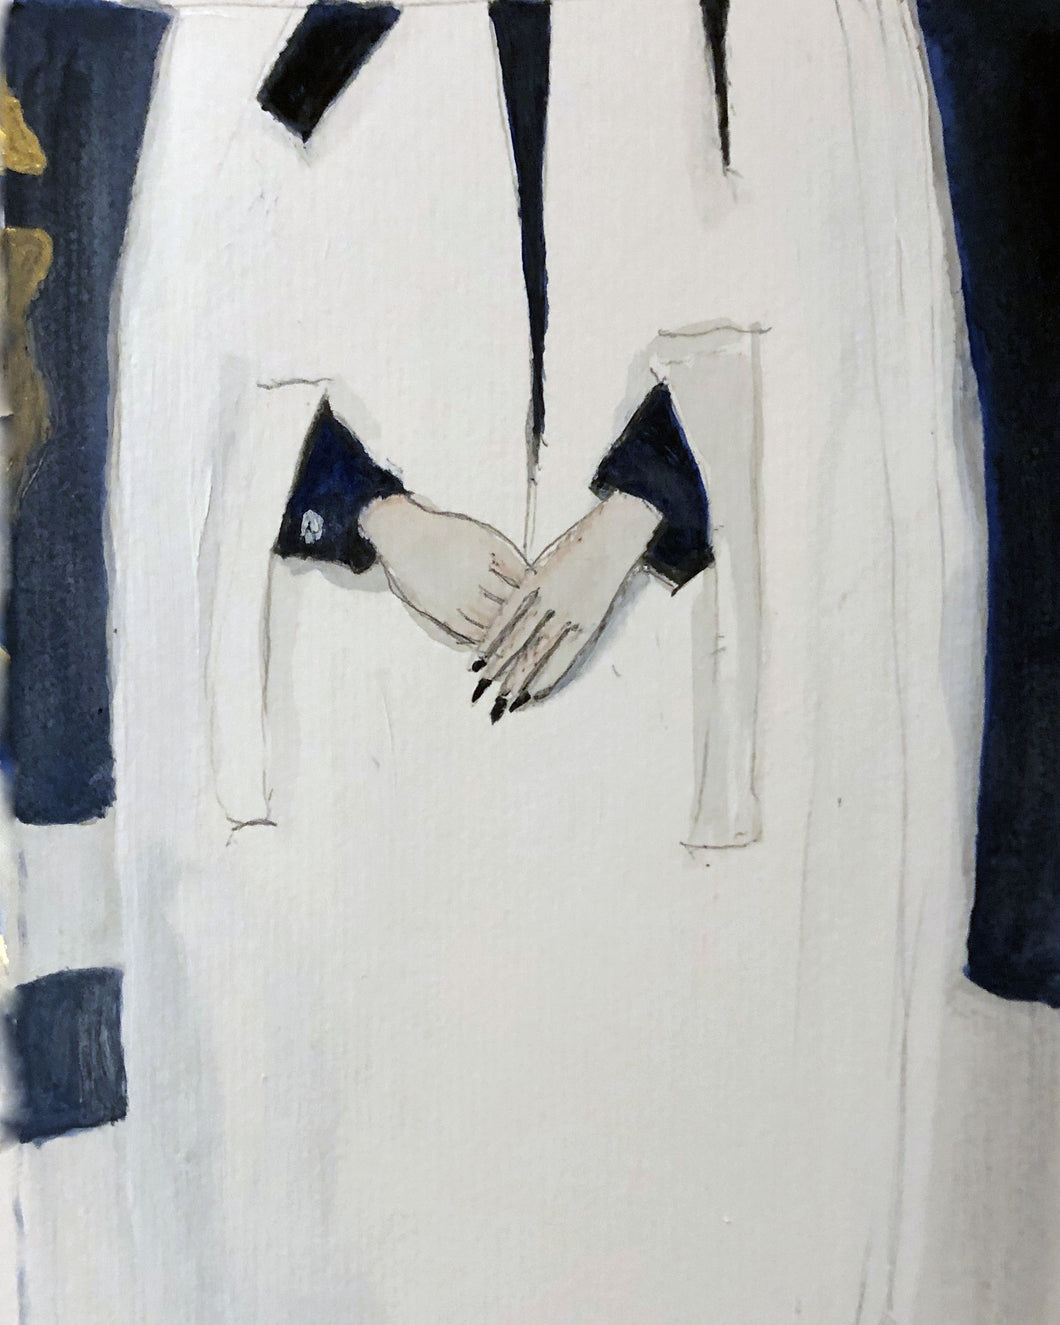 THOM BROWNE - AW '24 Ready-to-Wear hands painting - 'The Raven'